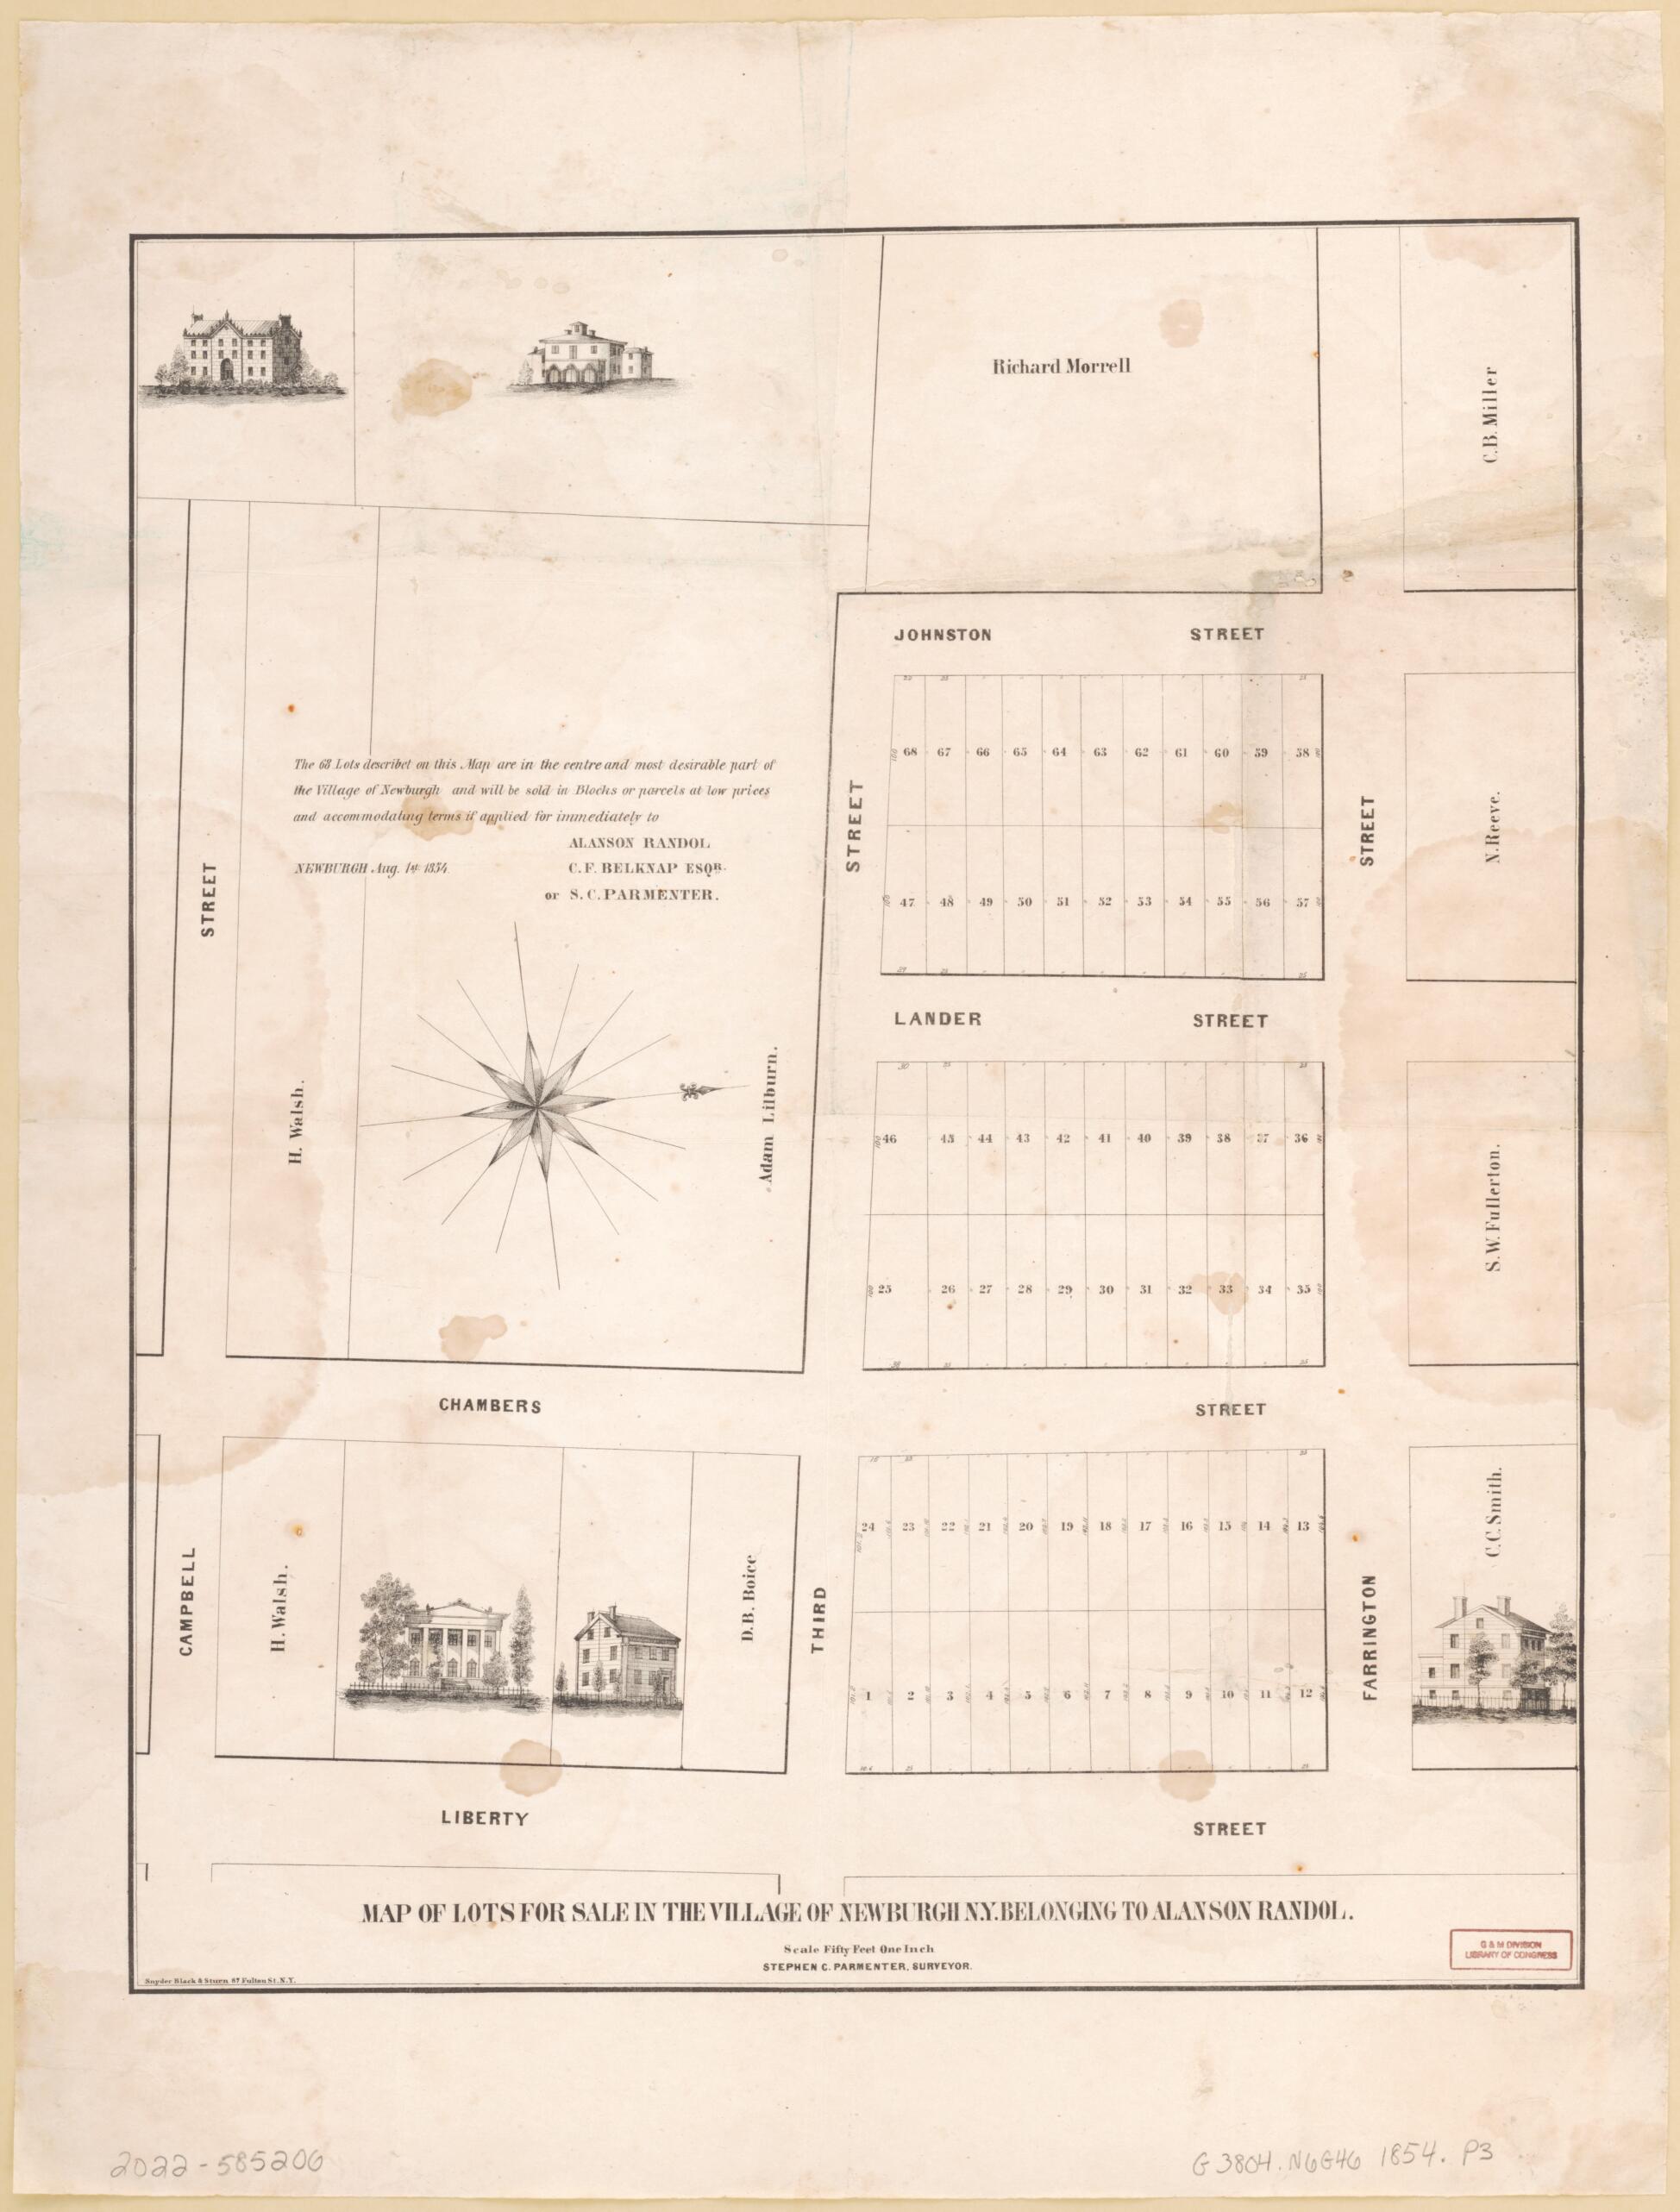 This old map of Map of Lots for Sale In the Village of Newburgh New York Belonging to Alanson Randol from 1854 was created by Stephen C. Parmenter in 1854